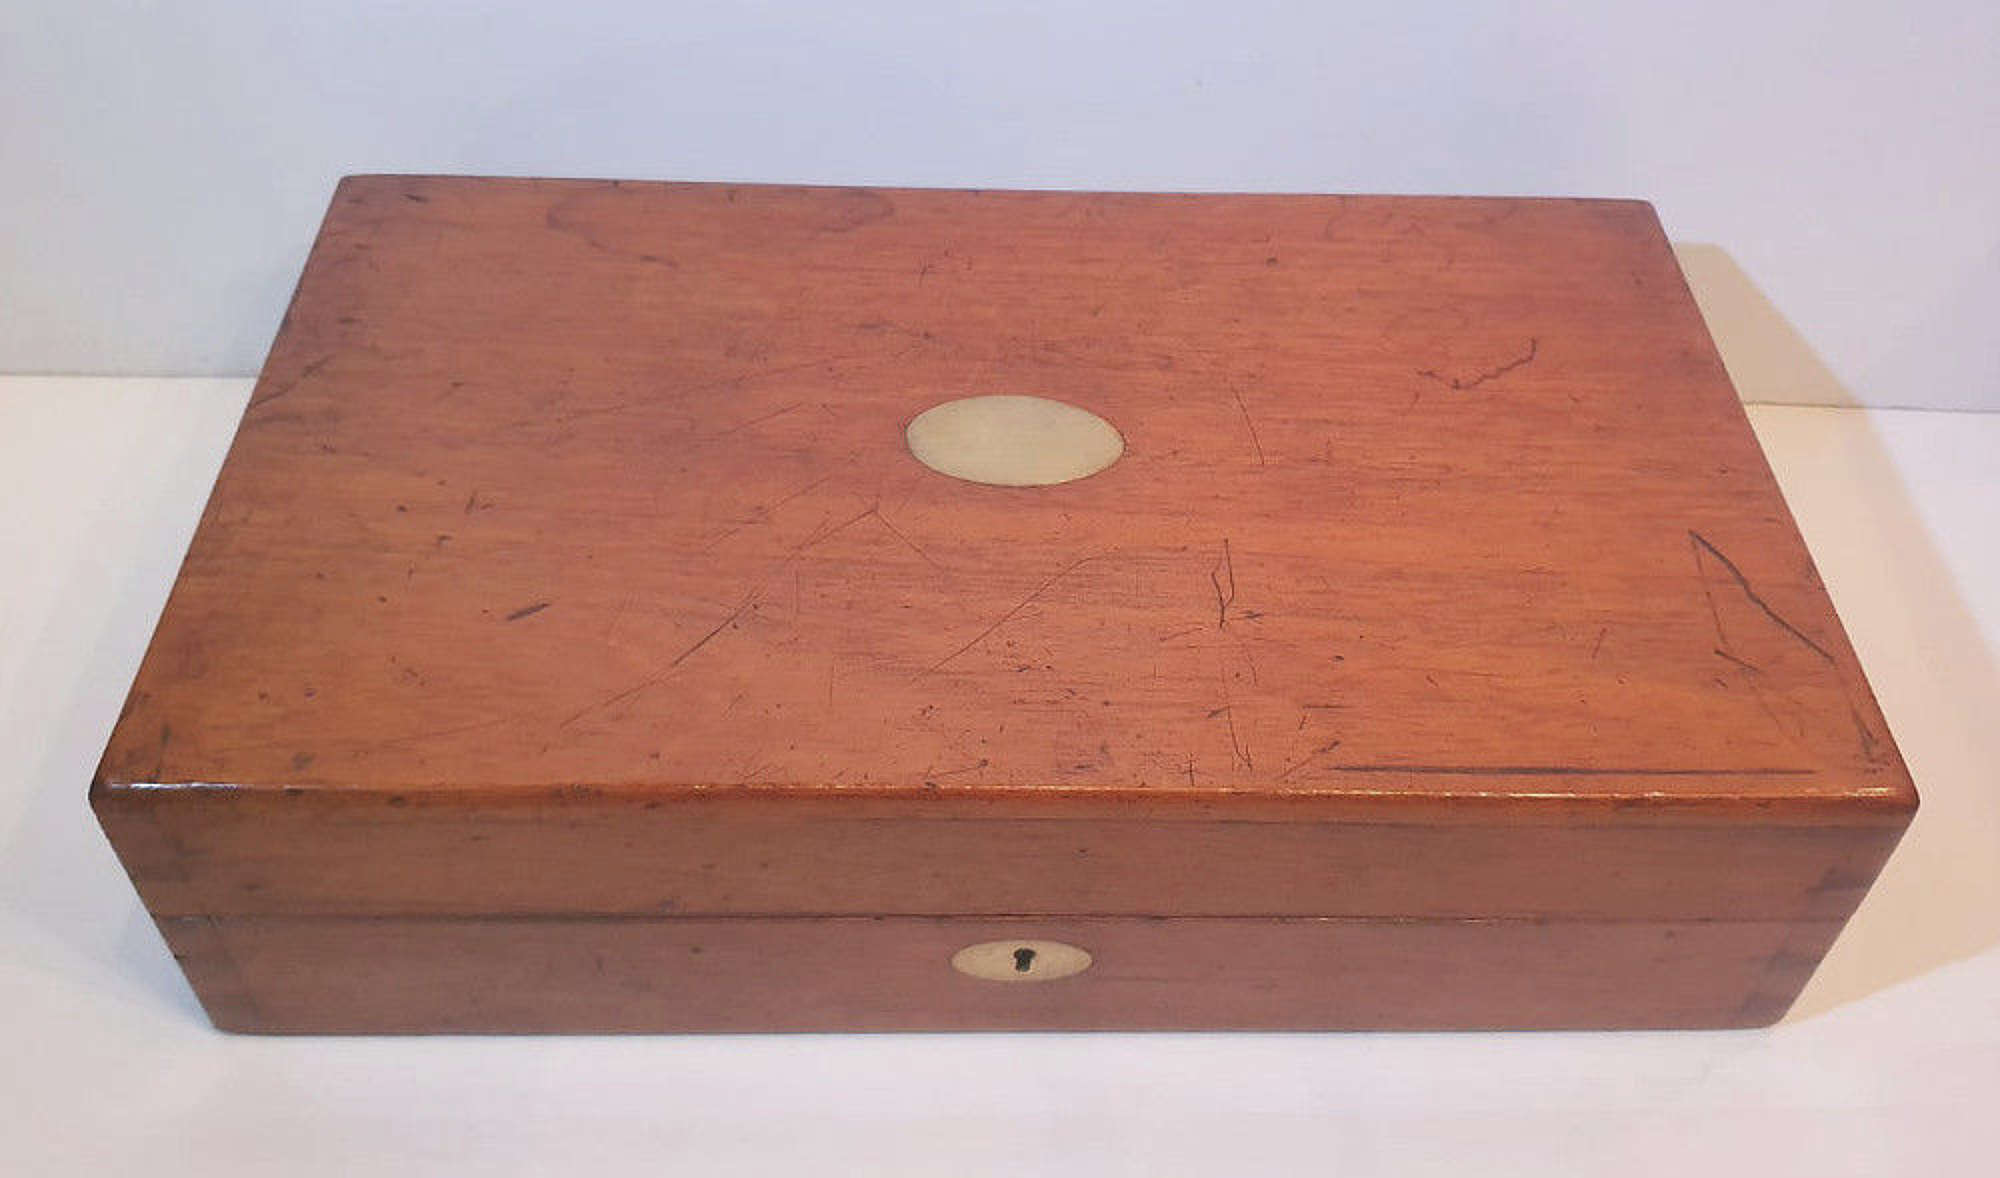 19th Century Mahogany Cased Games Box And Contents